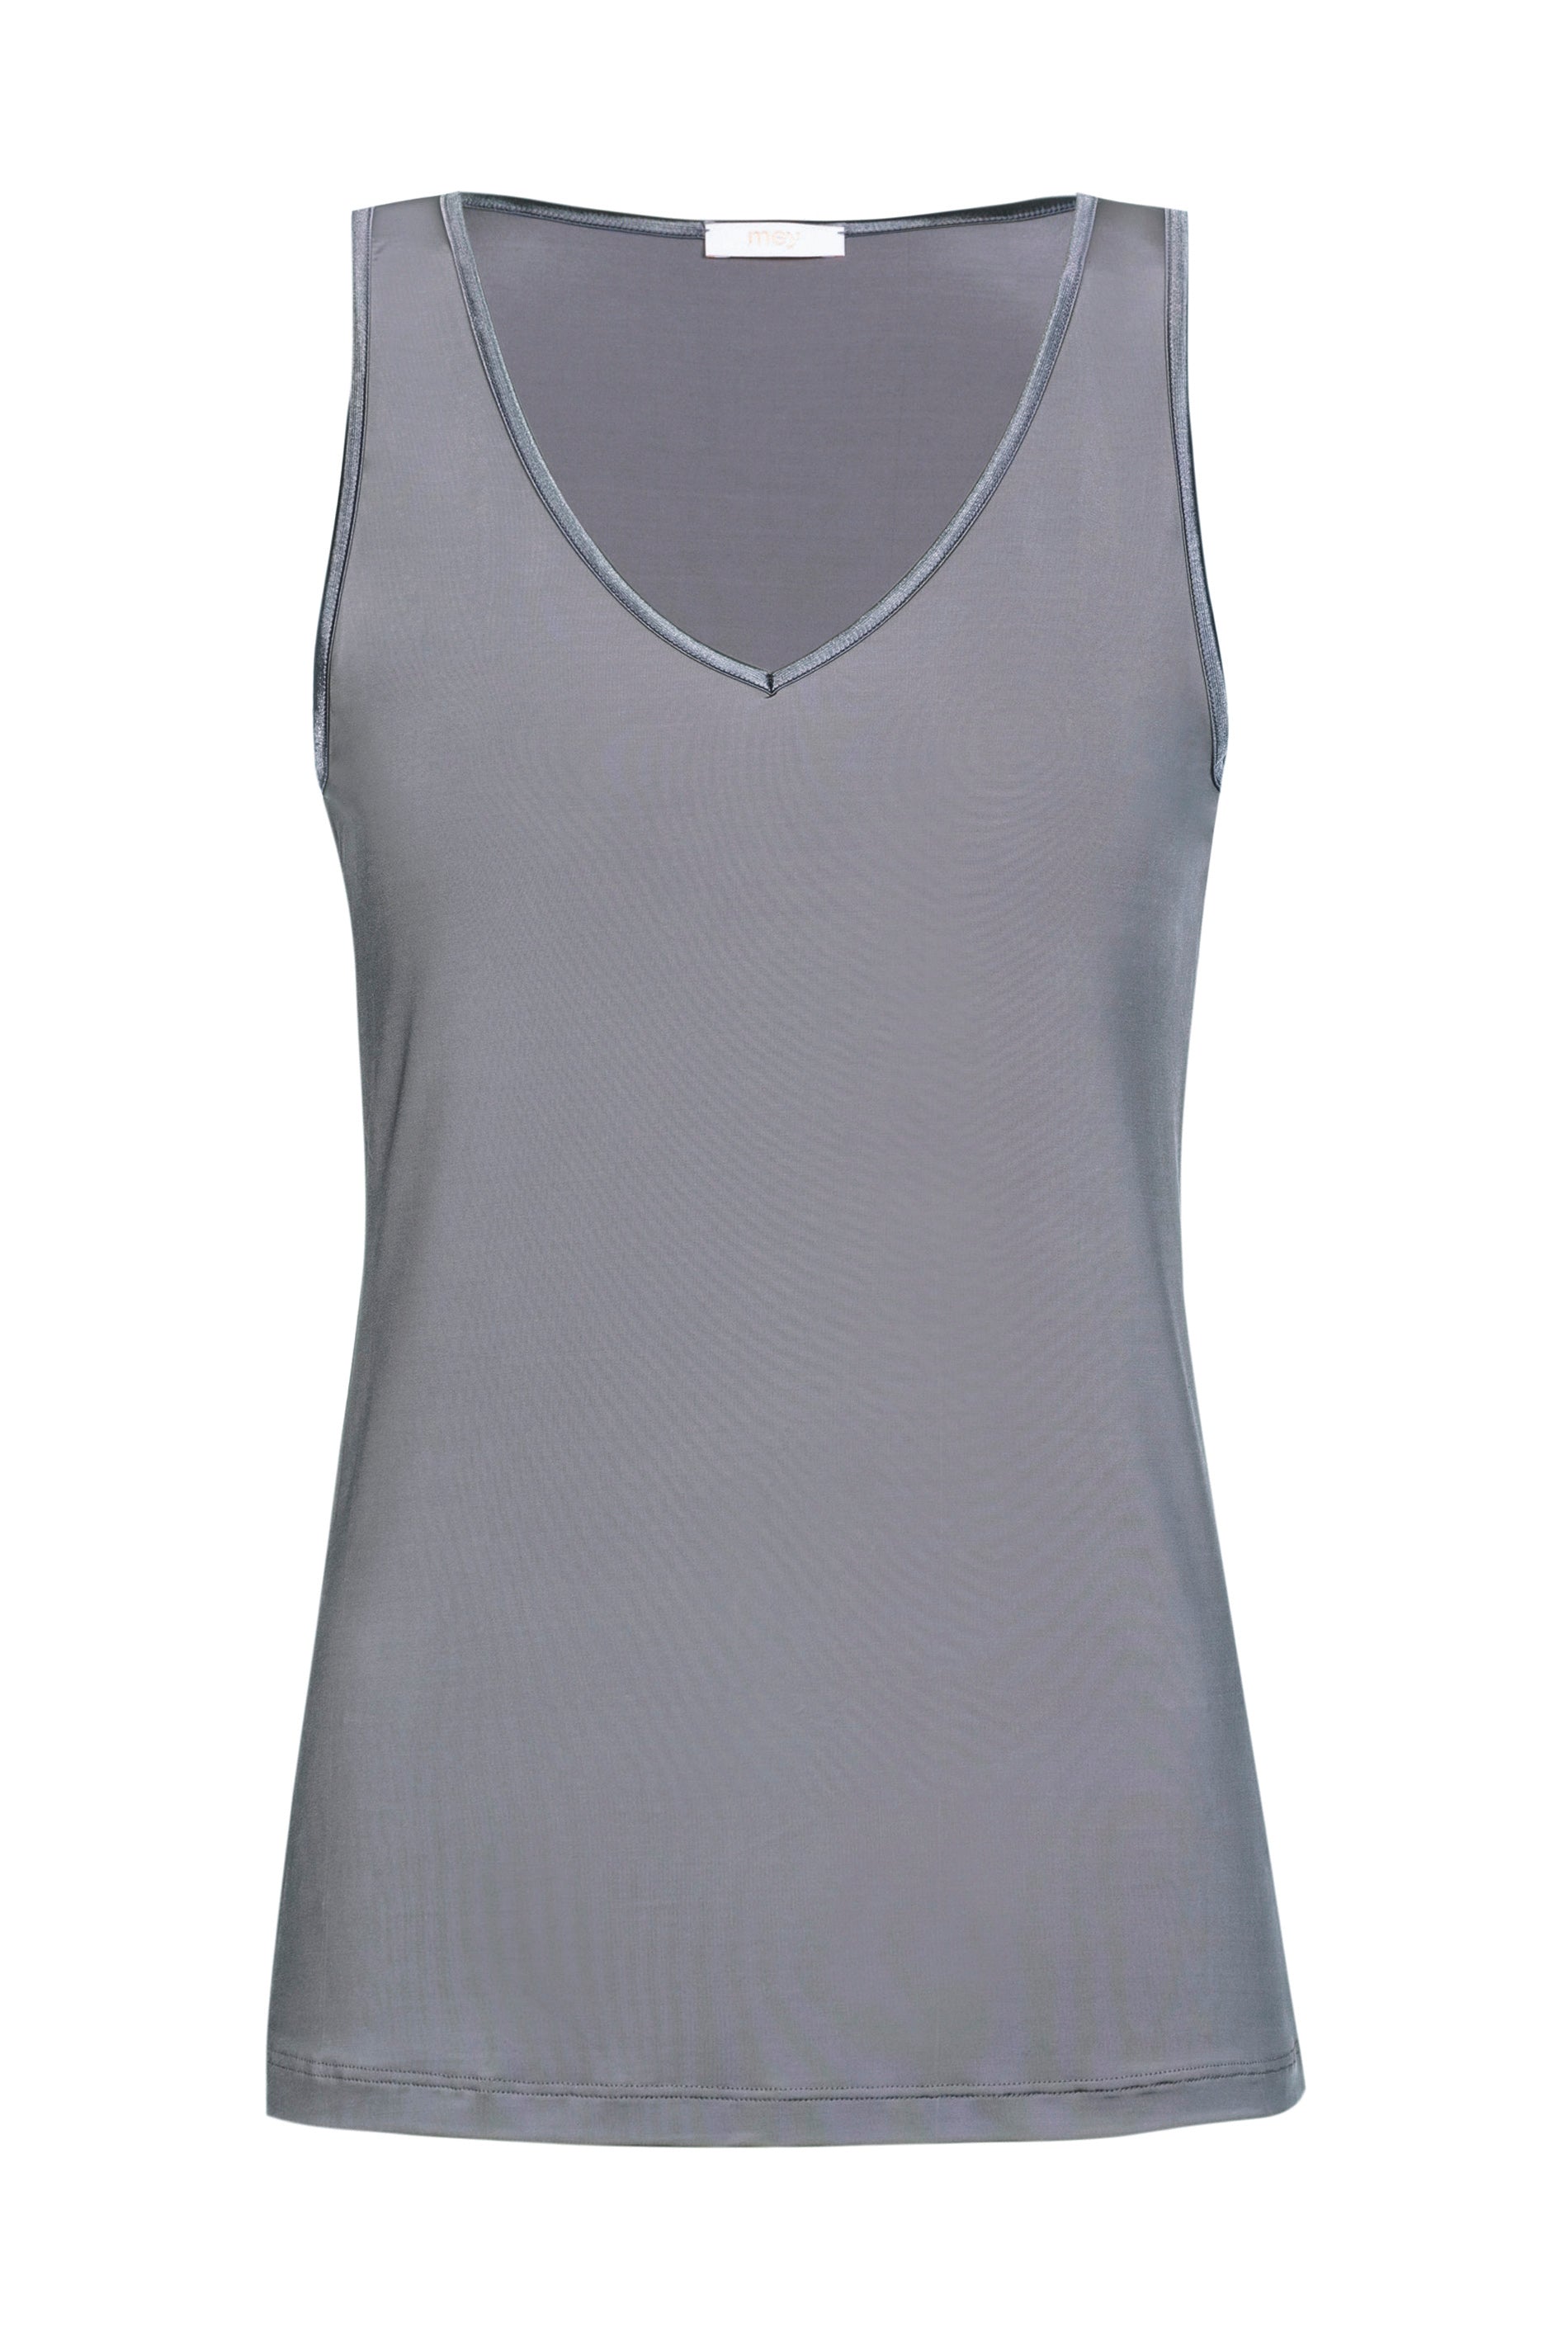 Top (Lovely Grey)